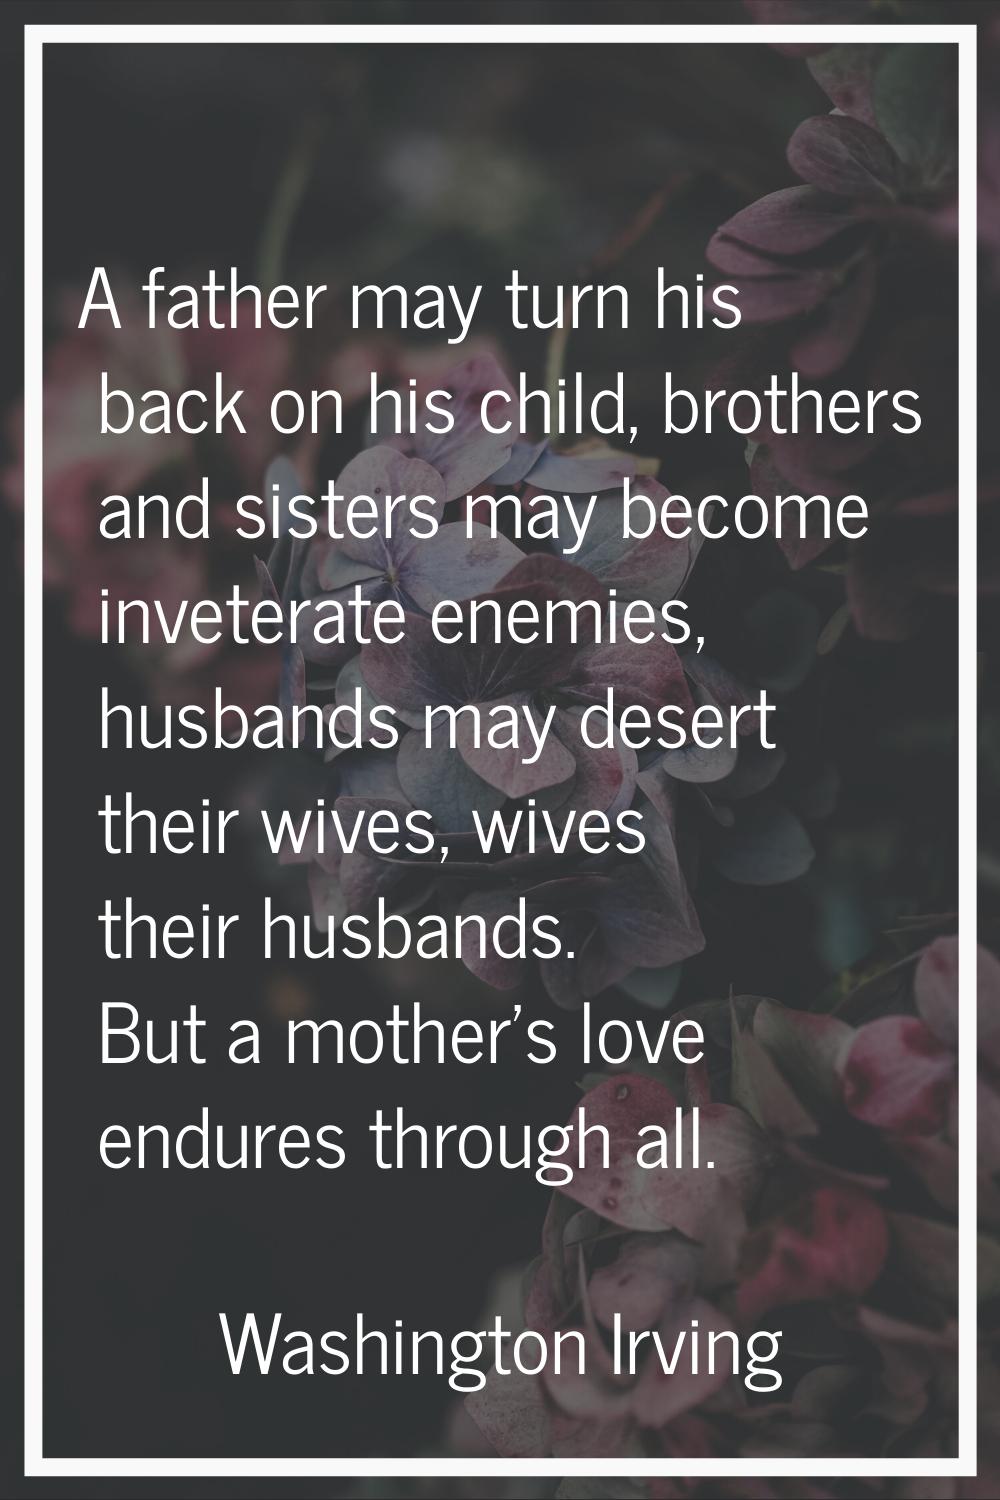 A father may turn his back on his child, brothers and sisters may become inveterate enemies, husban